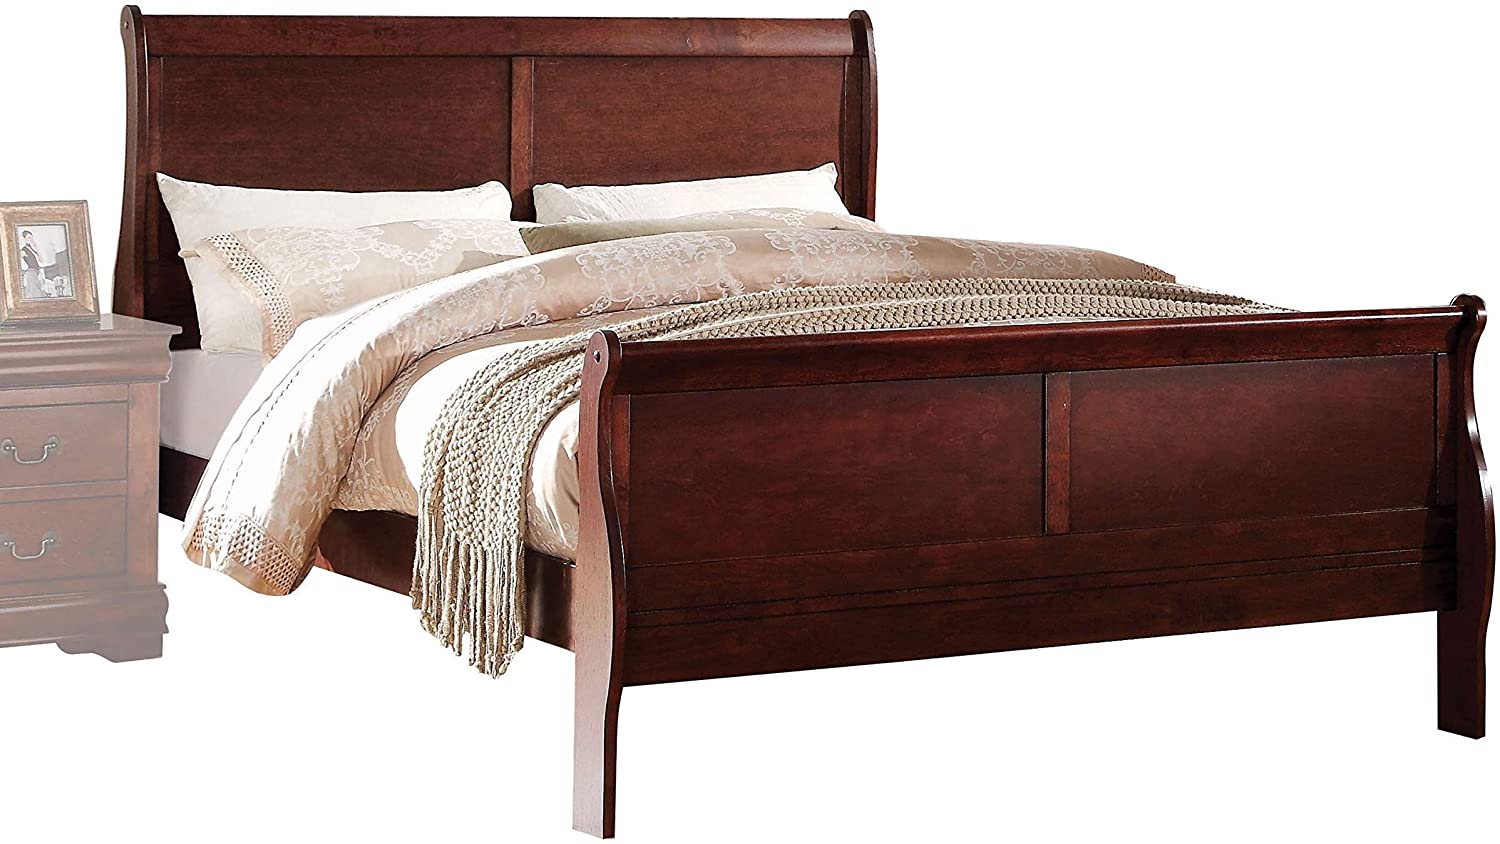 Louis Philippe Cherry Full Sleigh Bed With High Footboard, 1 - Kroger